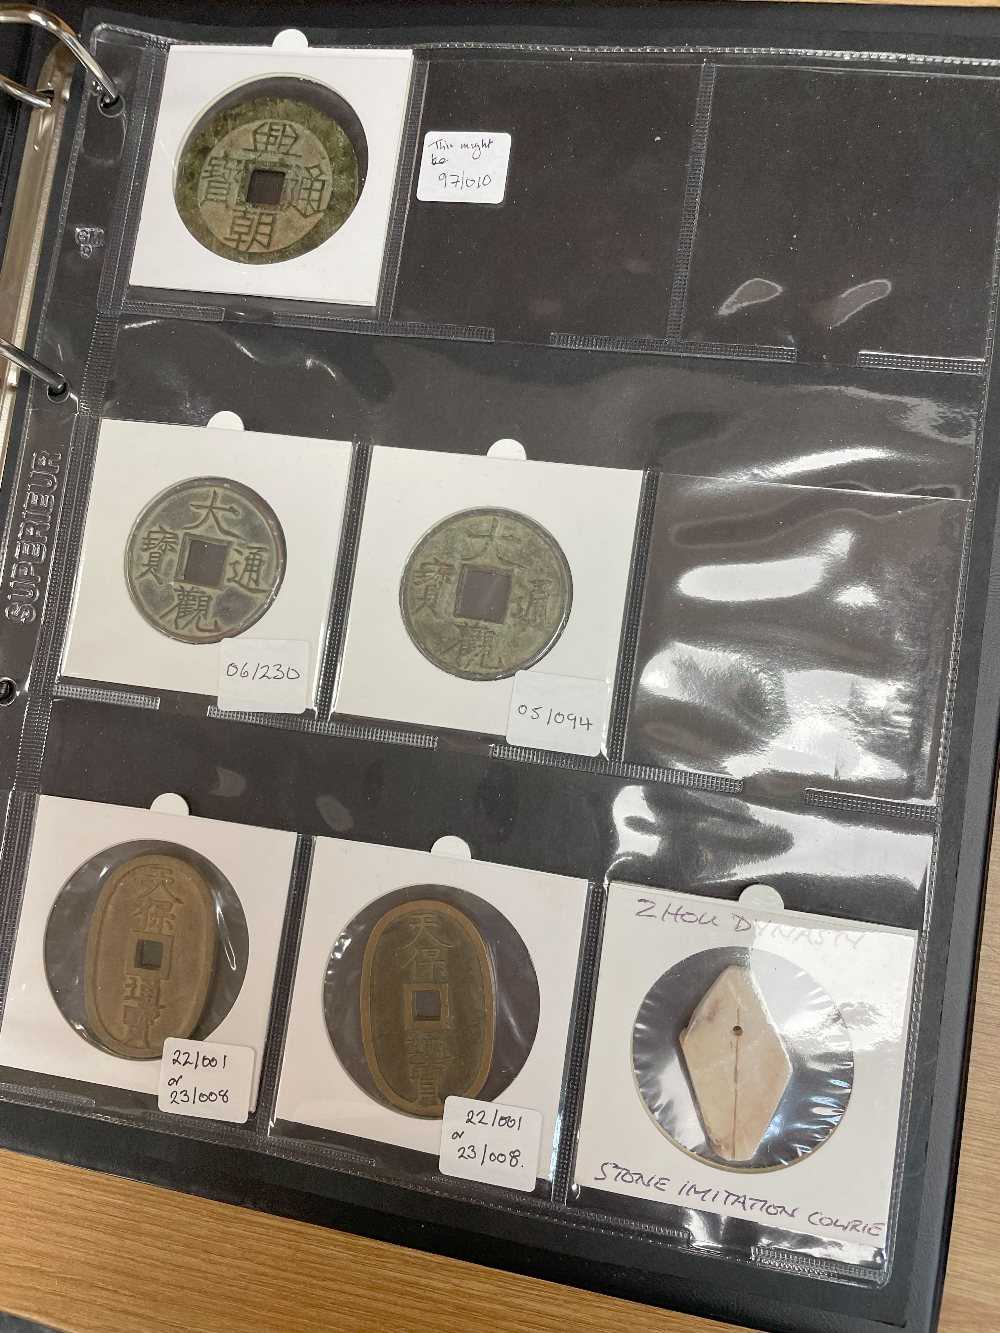 TWO COIN ALBUMS containing various collectable coins including Japanese Tenpō Tsūhō, Chinese cash - Image 12 of 16